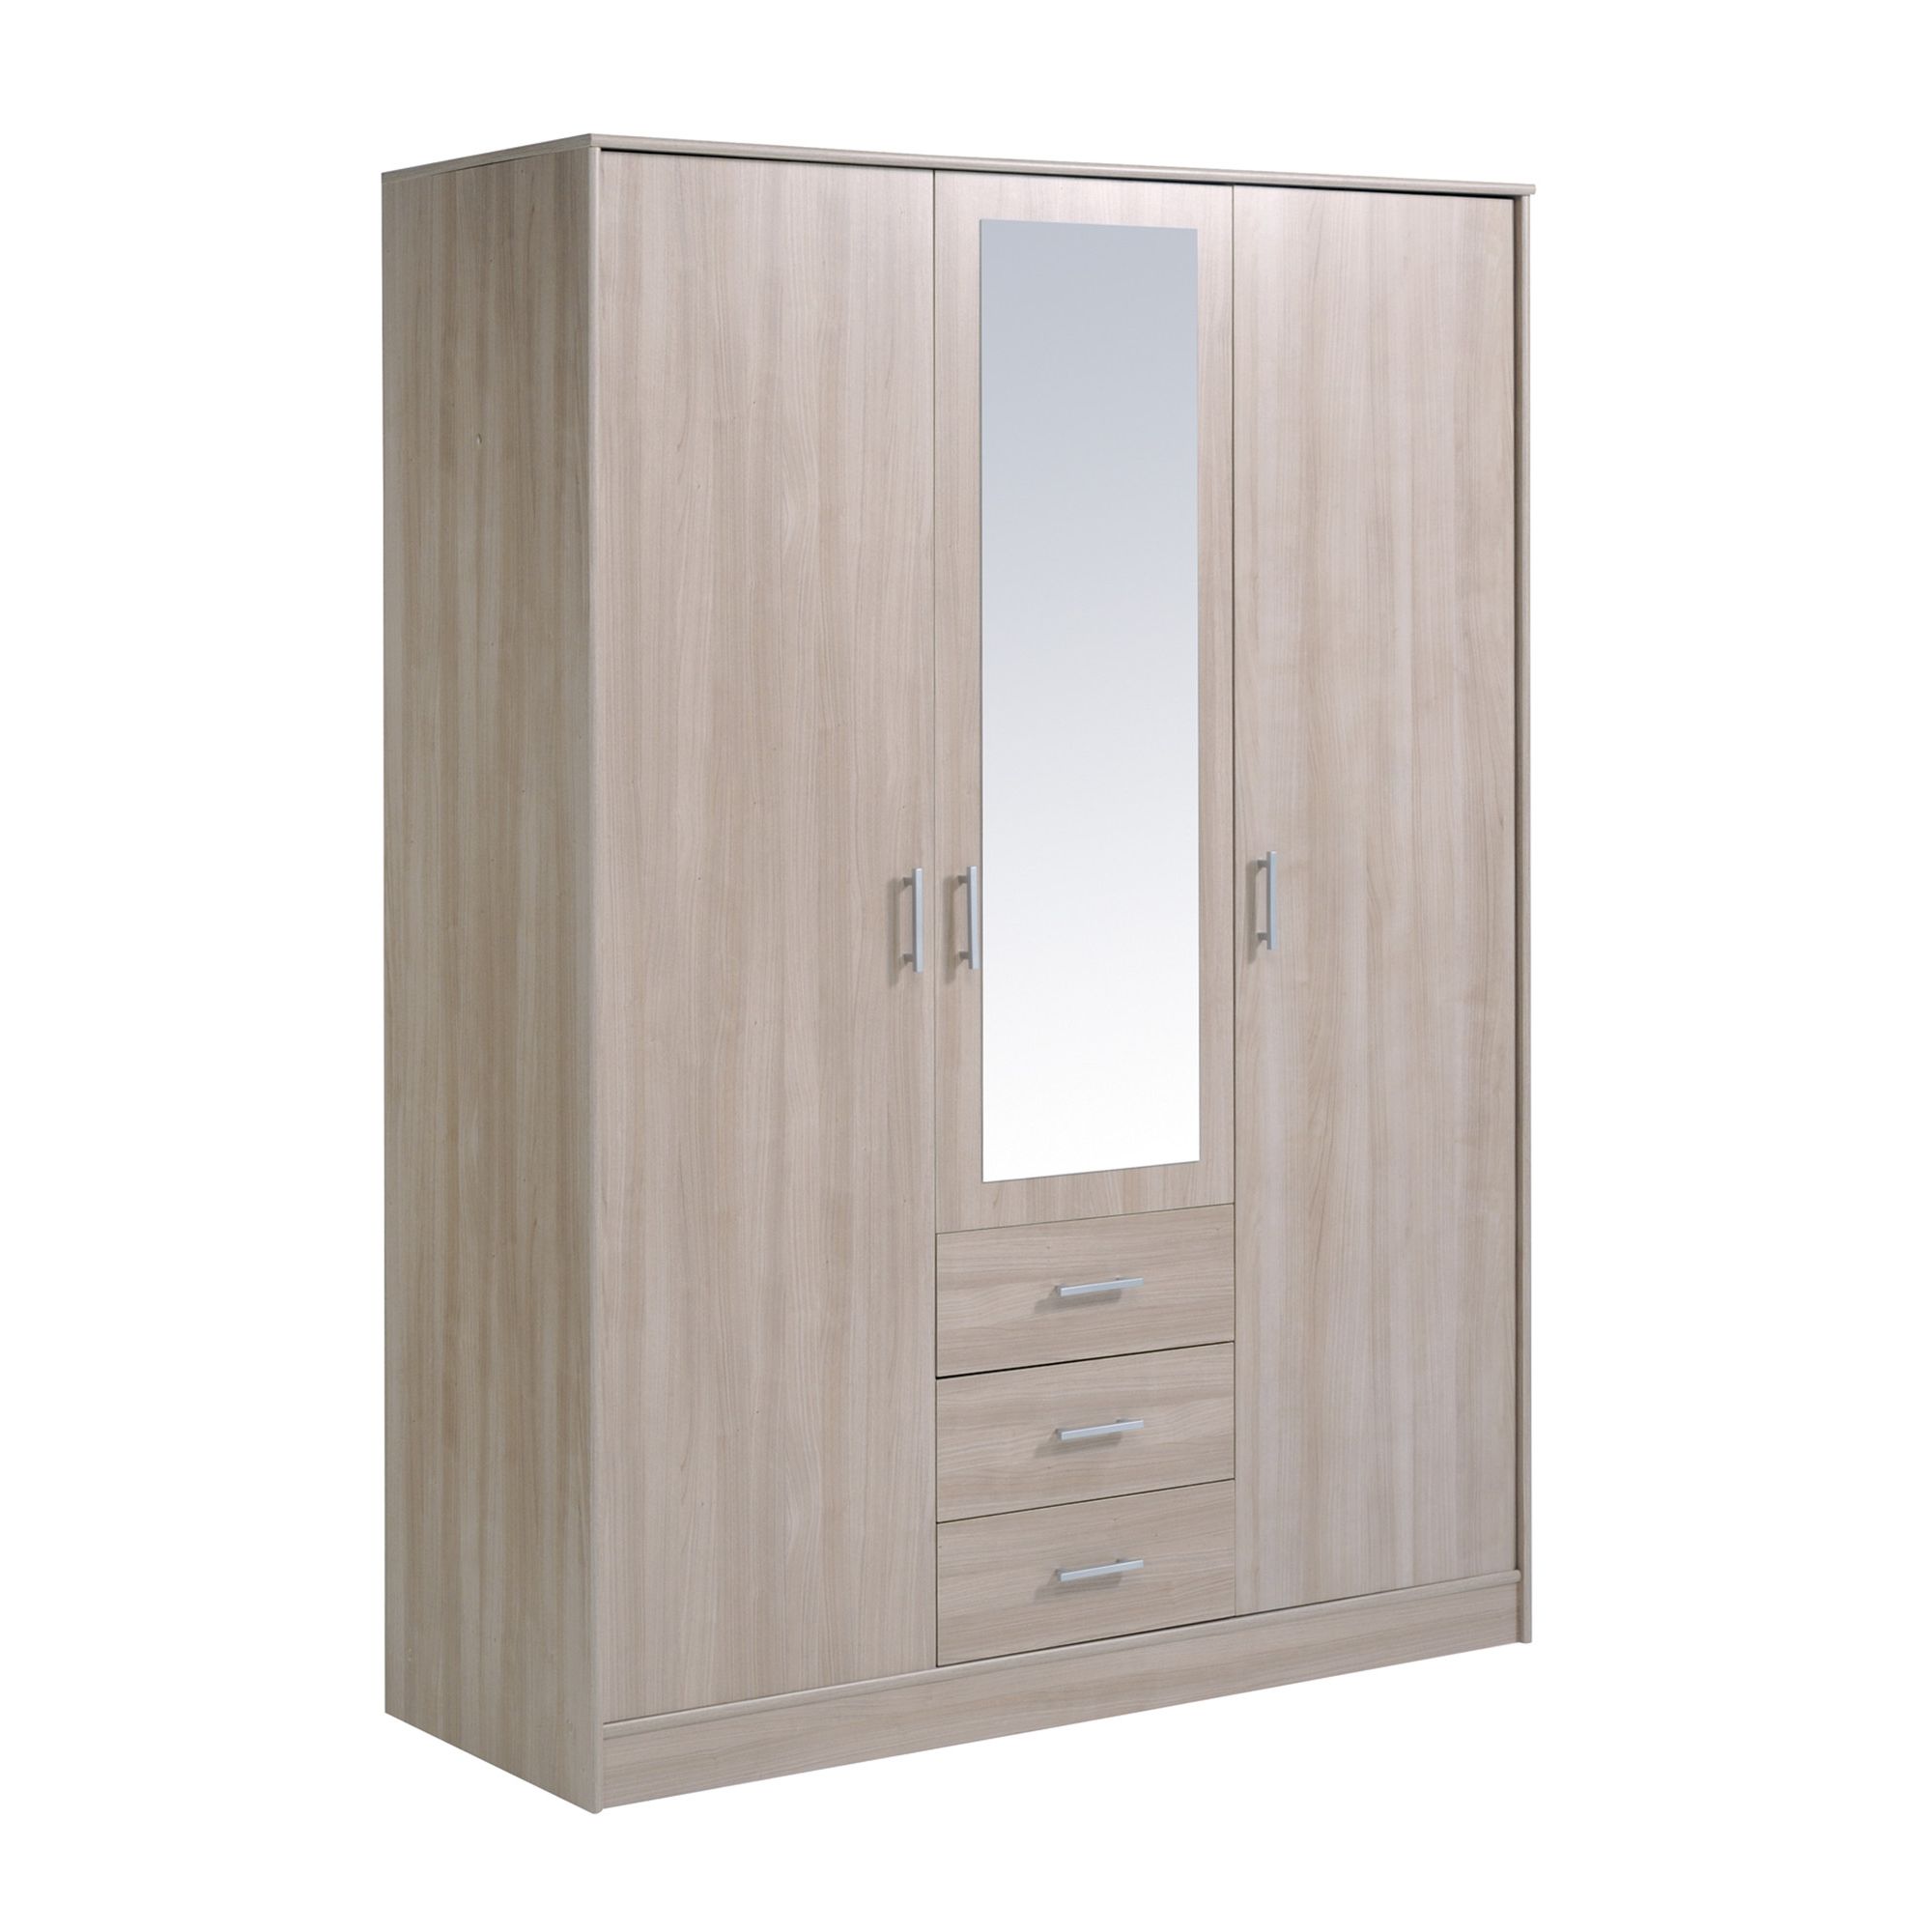 Parisot Essential Wardrobe with 3 Doors and 3 Drawers - Bruges at Tesco Direct